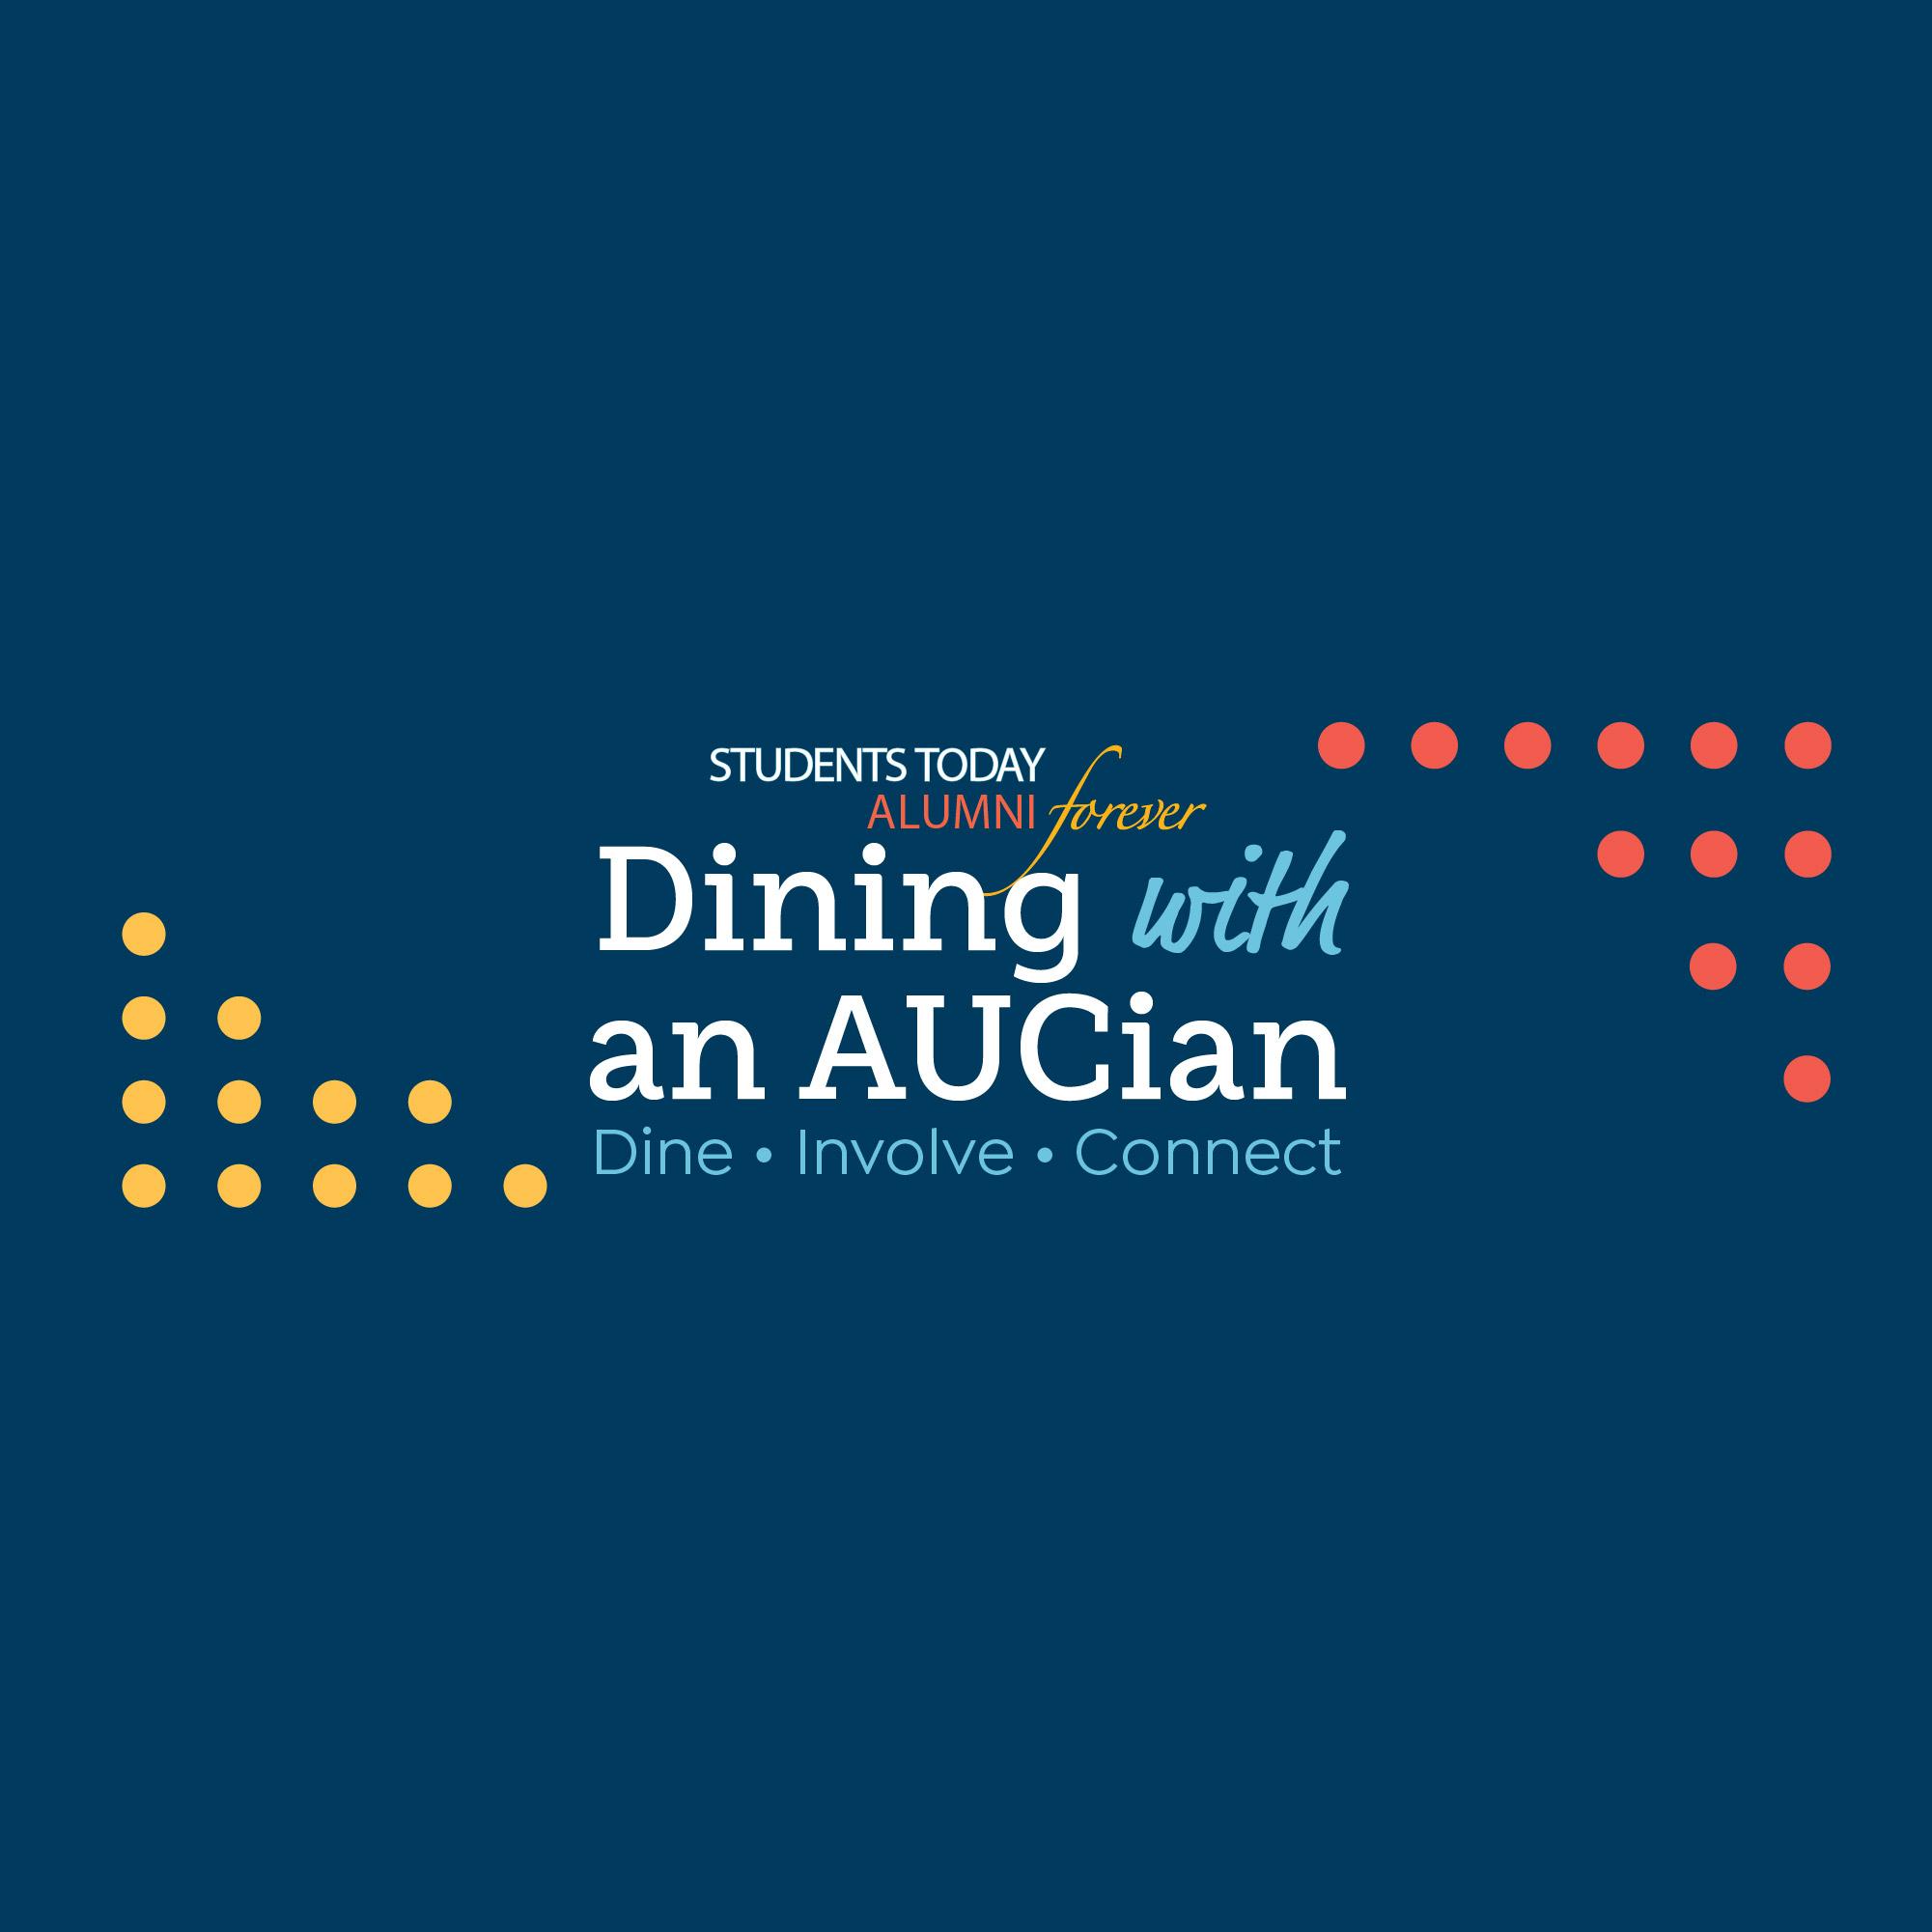 dining-with-an-aucian